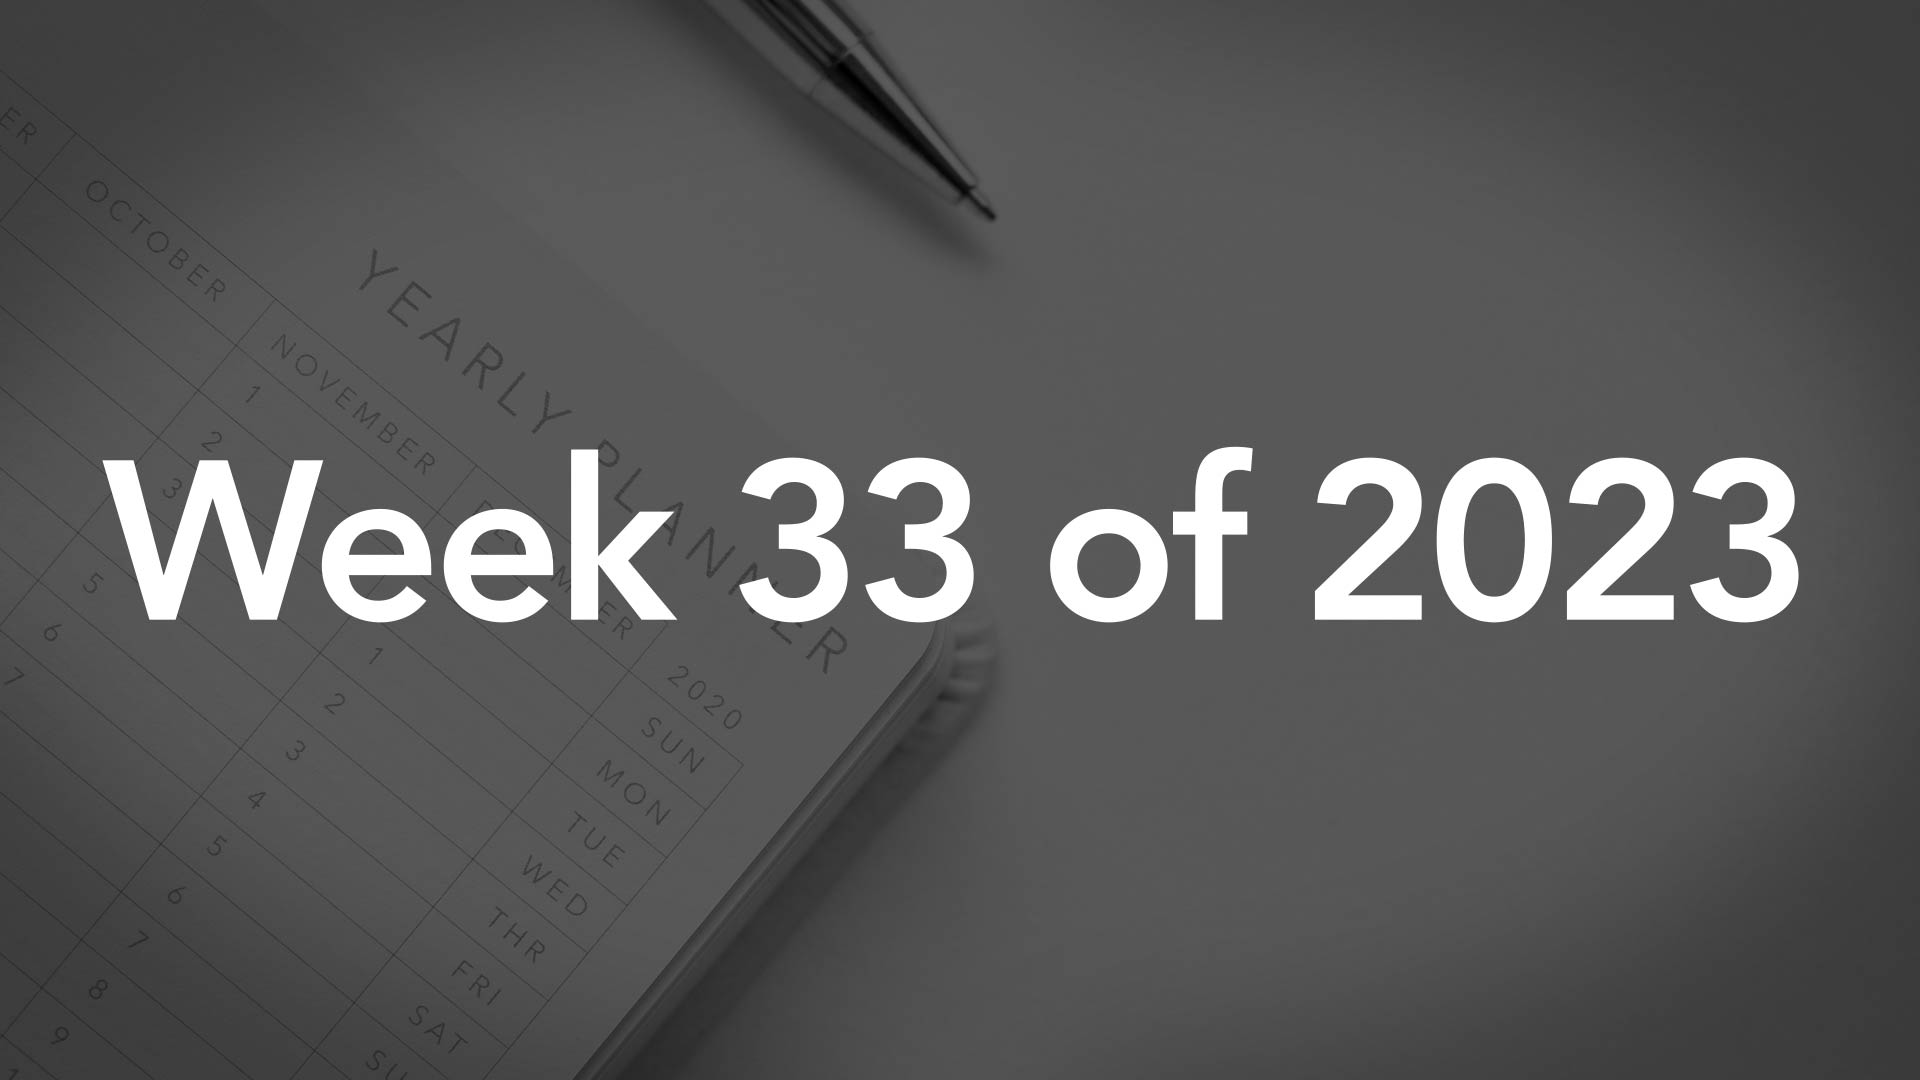 List of National Days for Week 33 of 2023